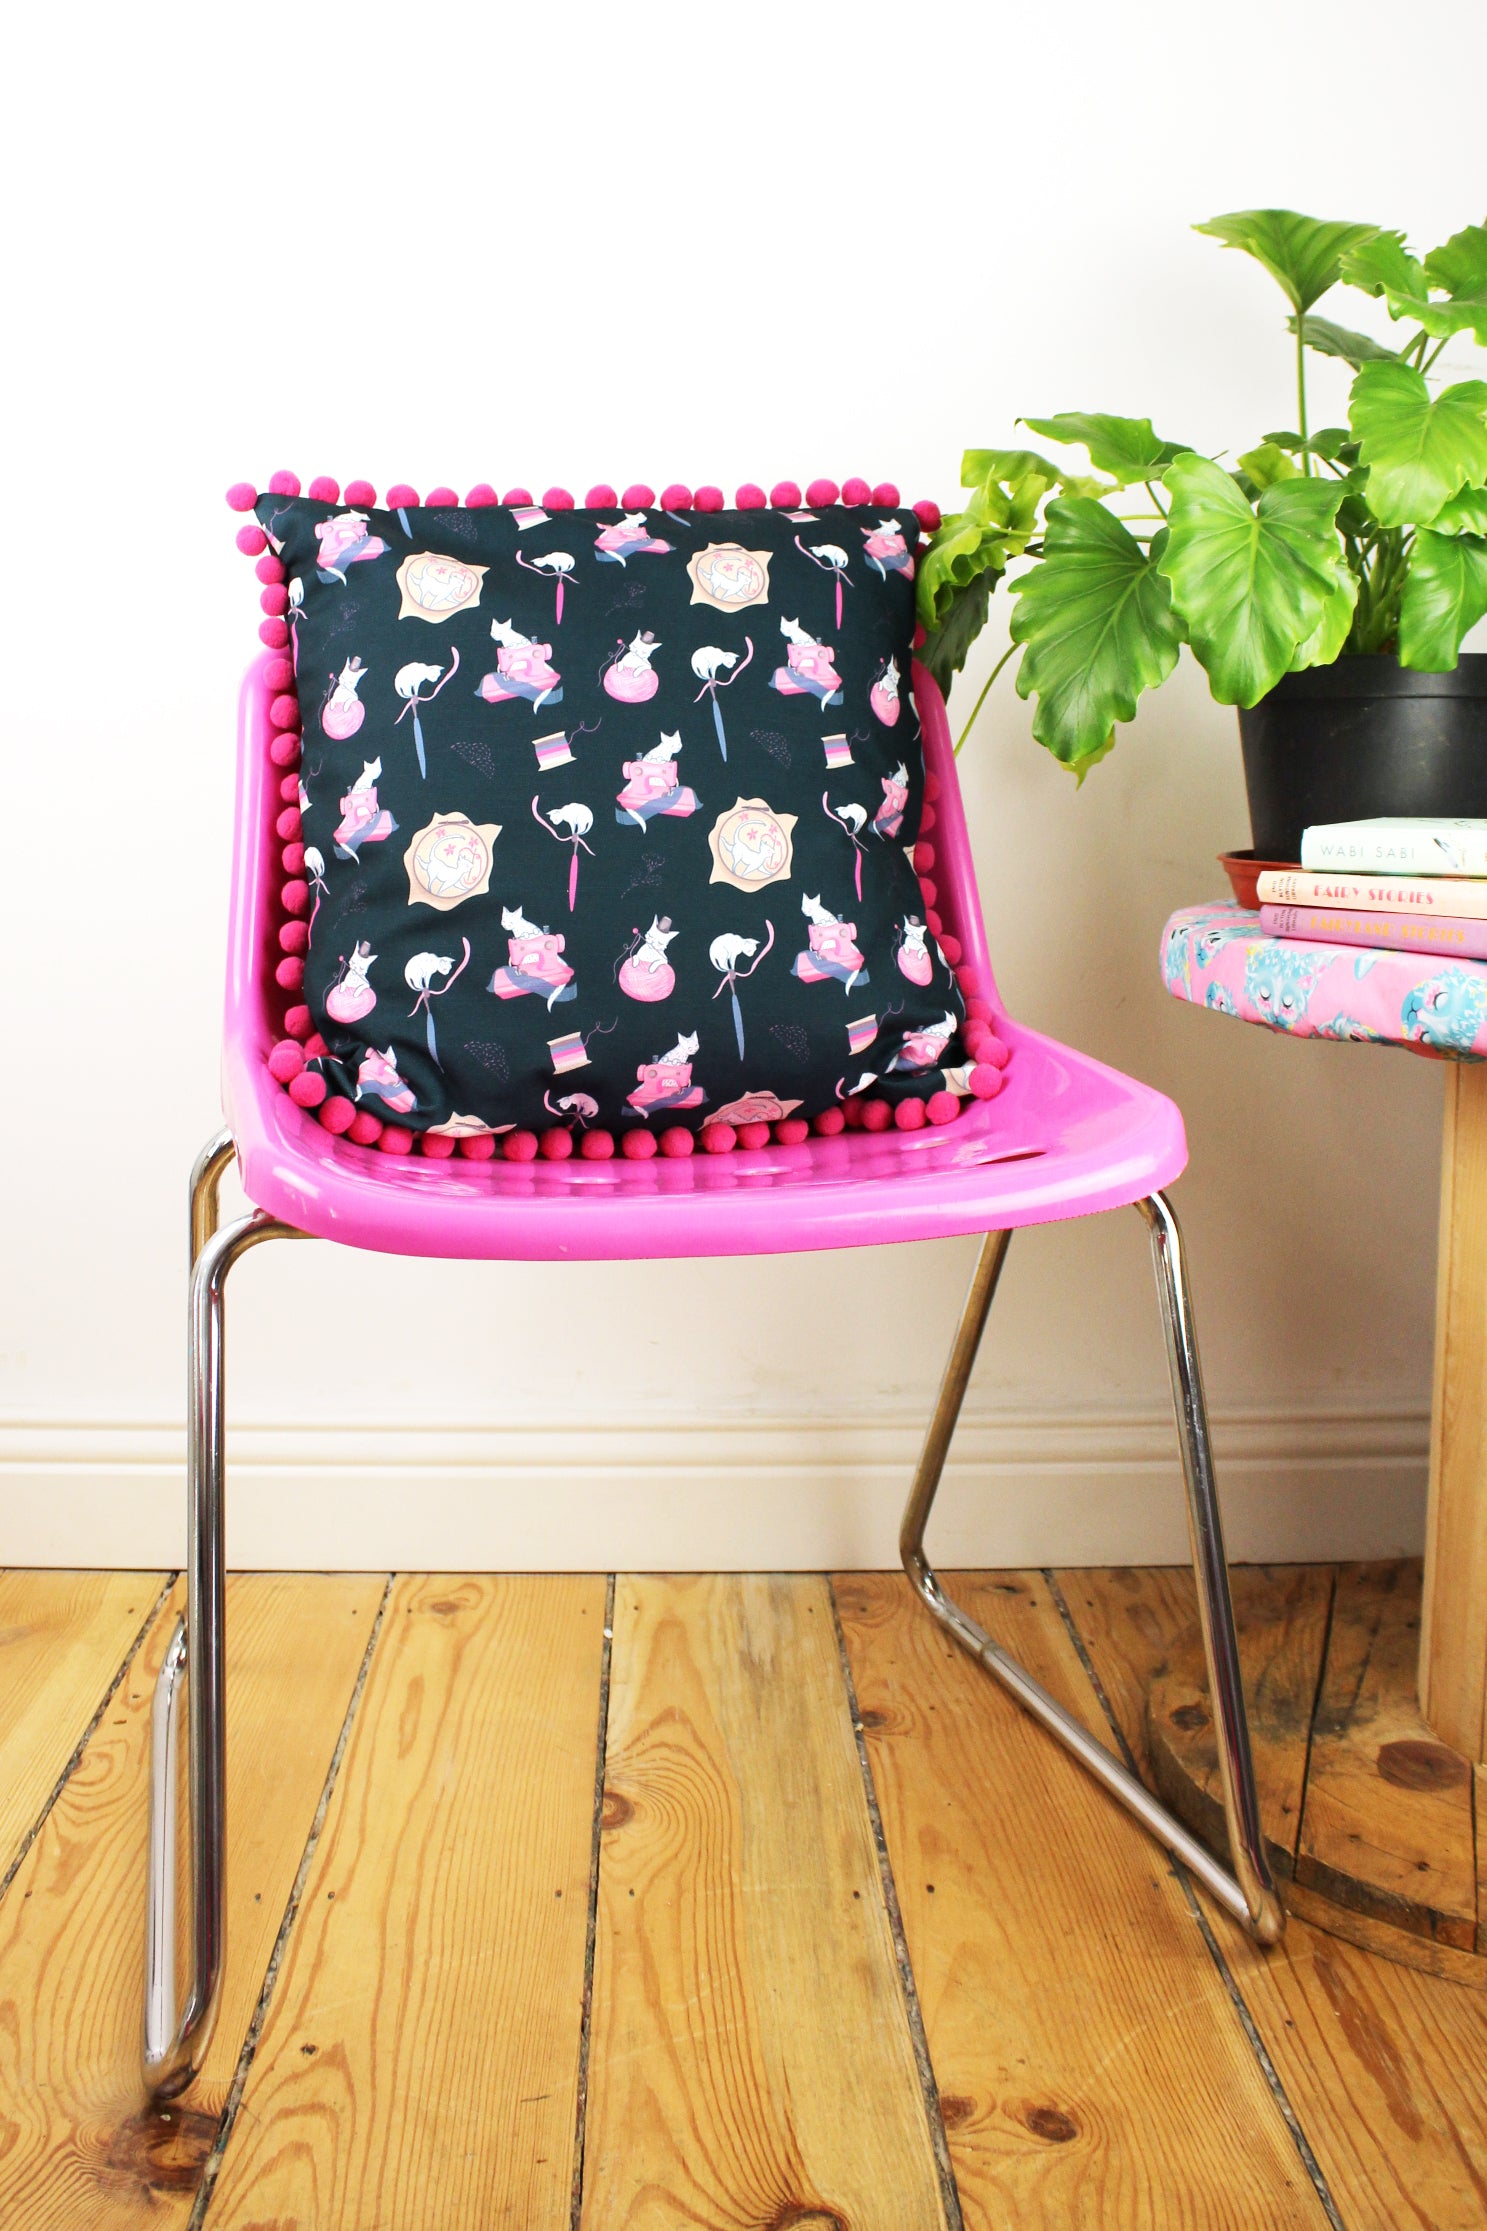 Dark Blue Sewing Cats Cushion Cover with Pink Pom Pom Trim